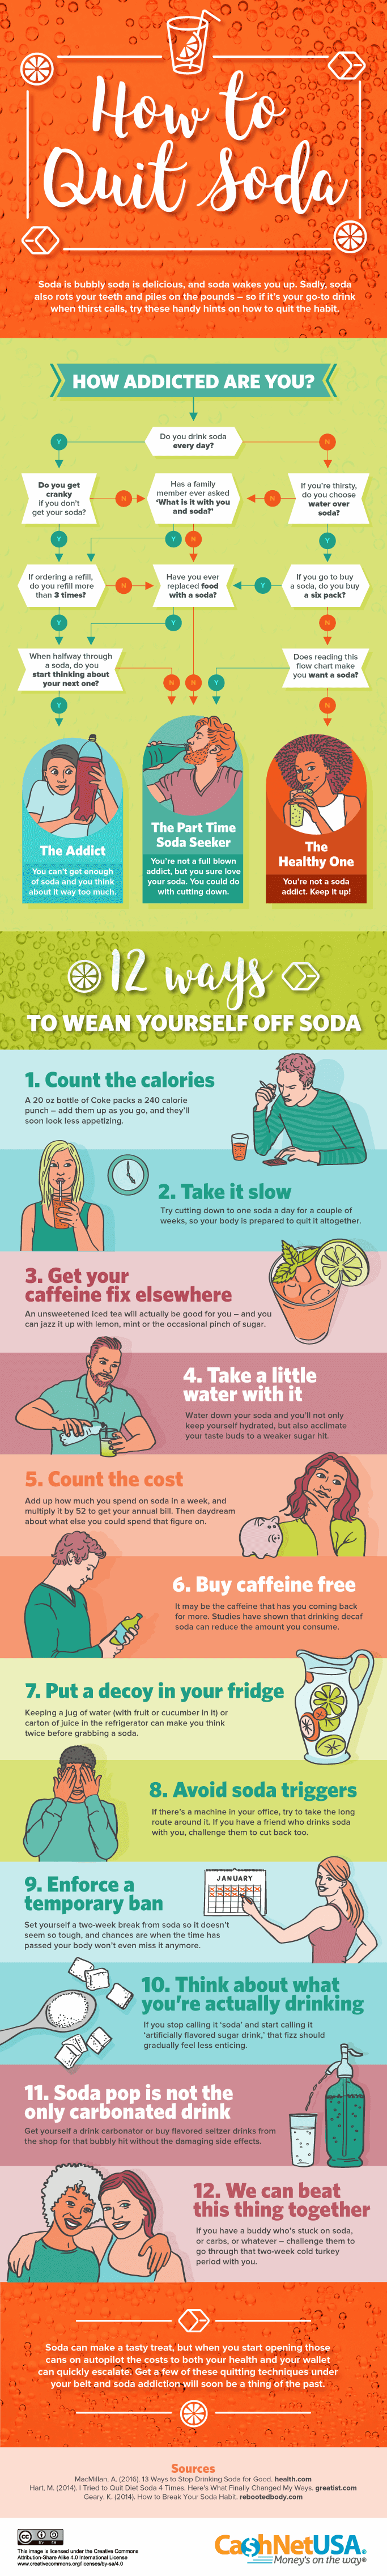 How to Quit Soda Infographic